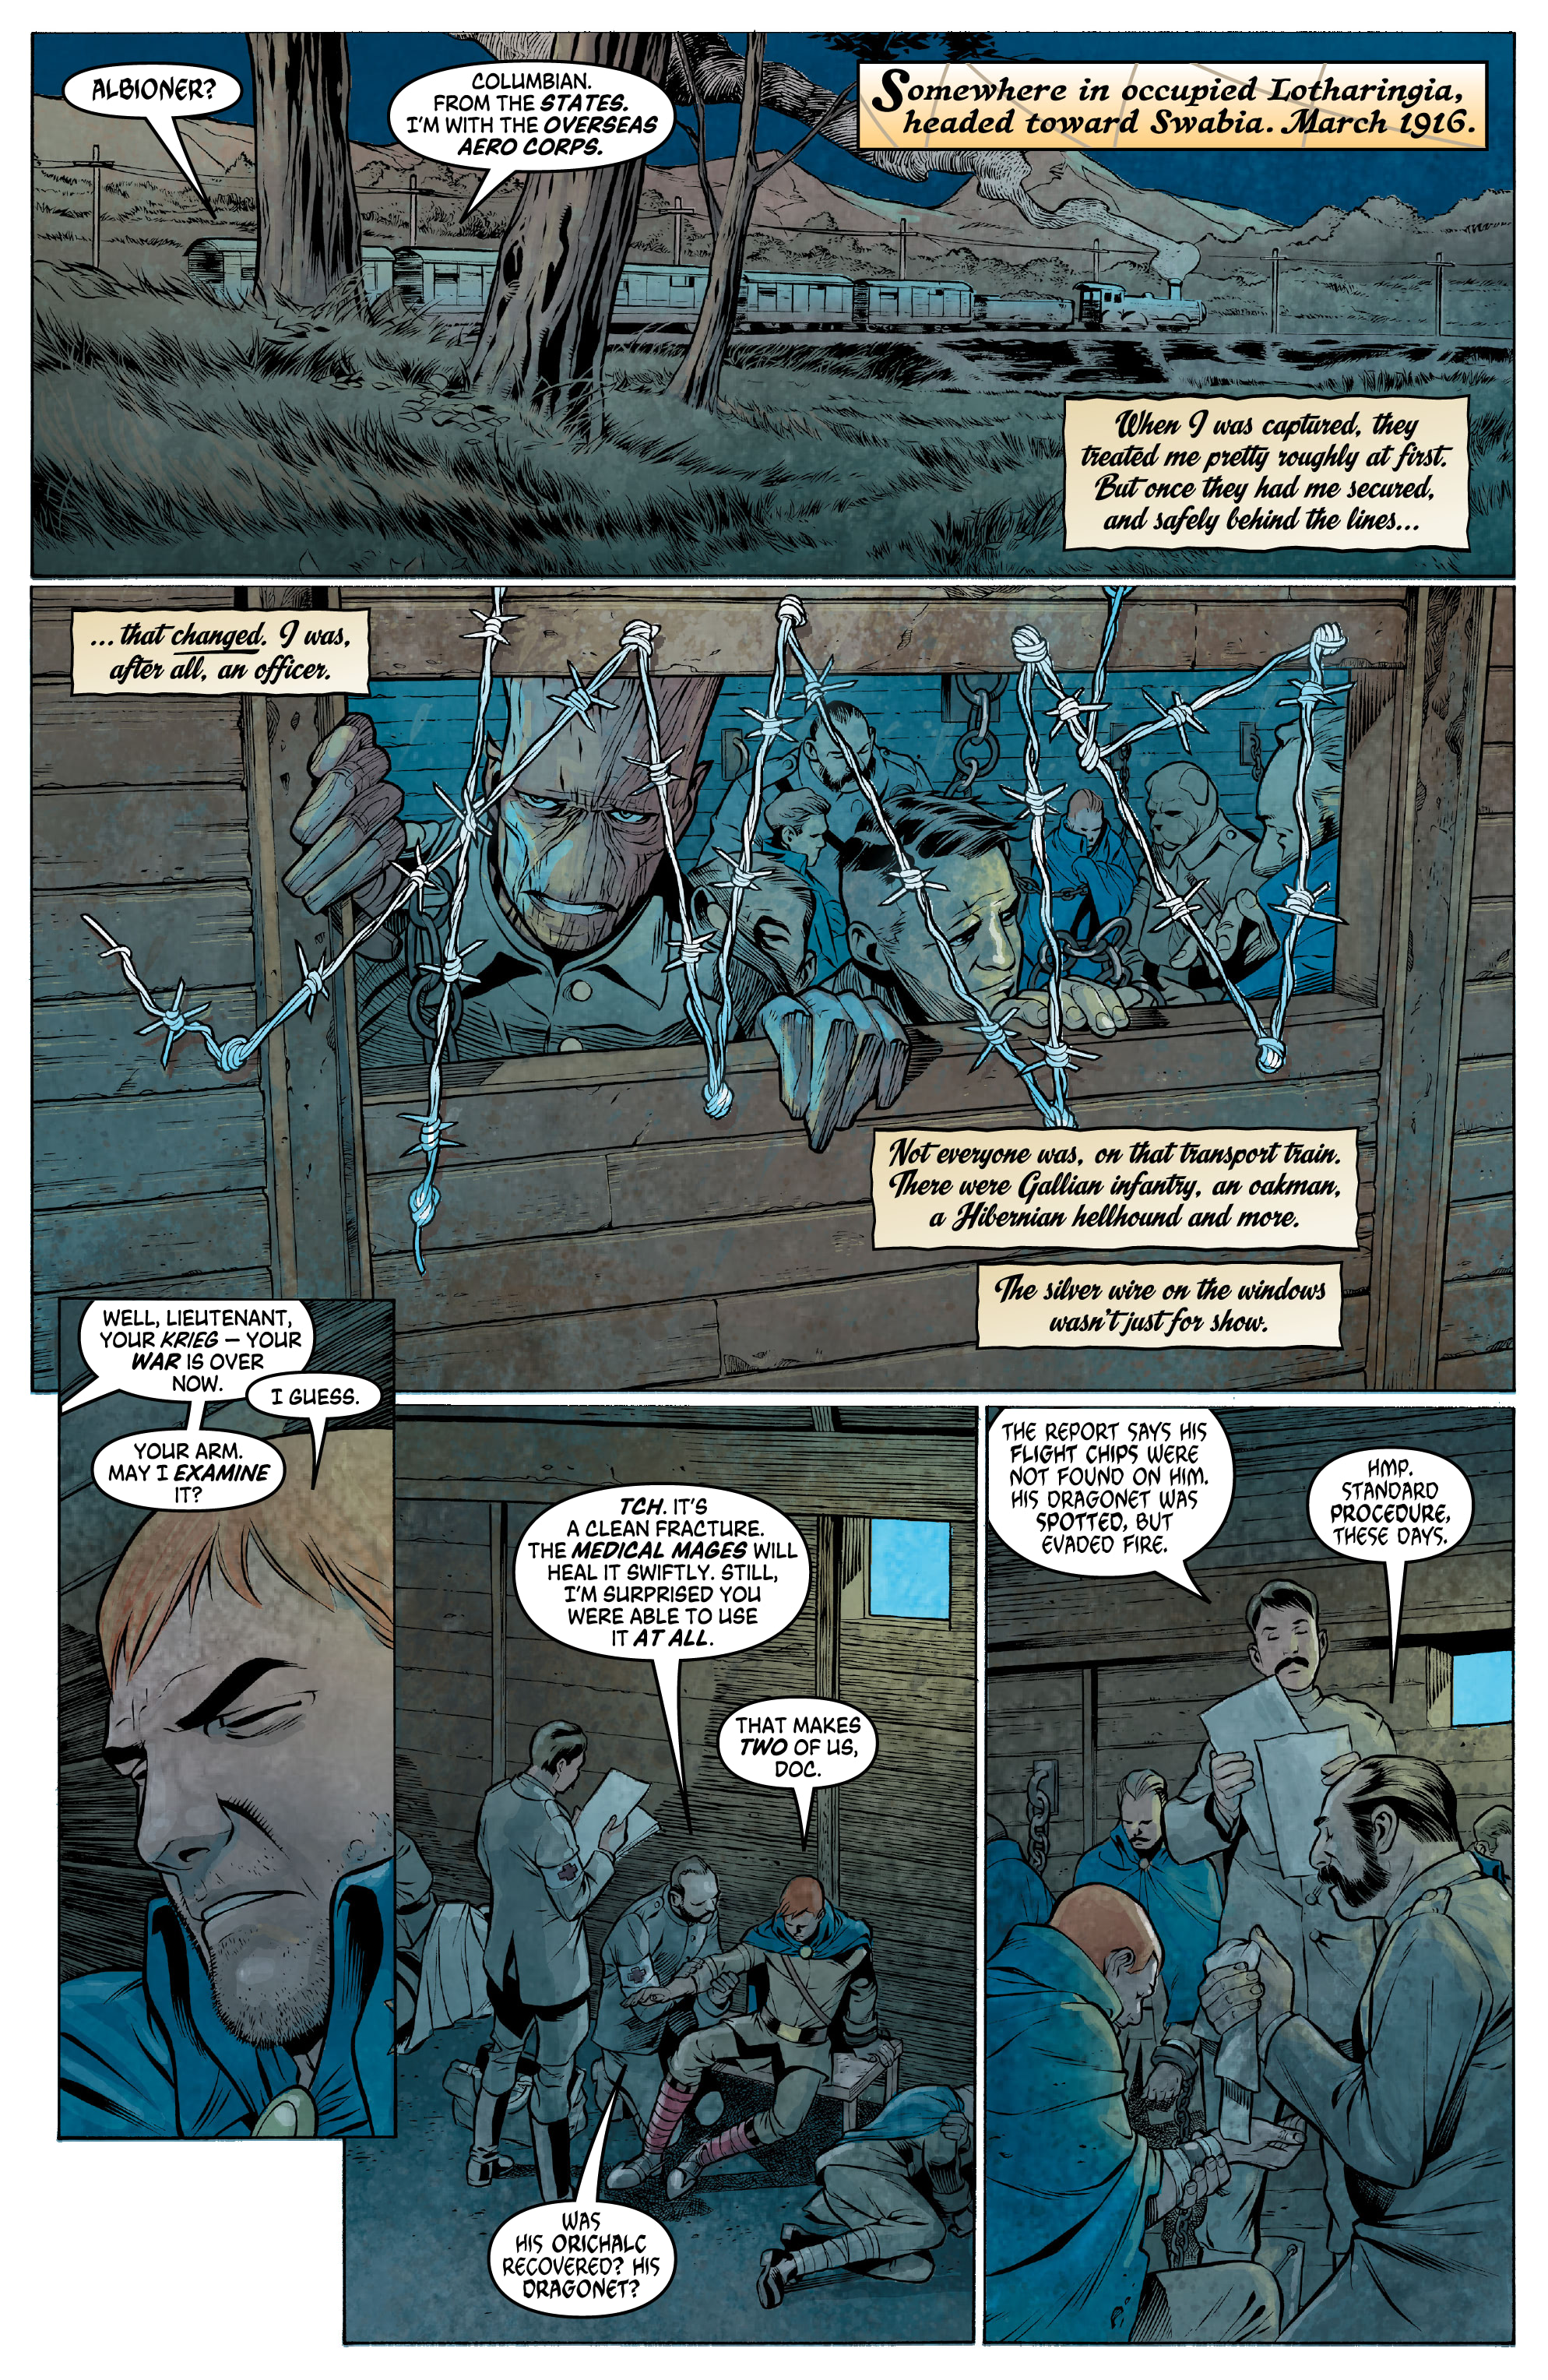 Arrowsmith: Behind Enemy Lines (2022-): Chapter 2 - Page 3